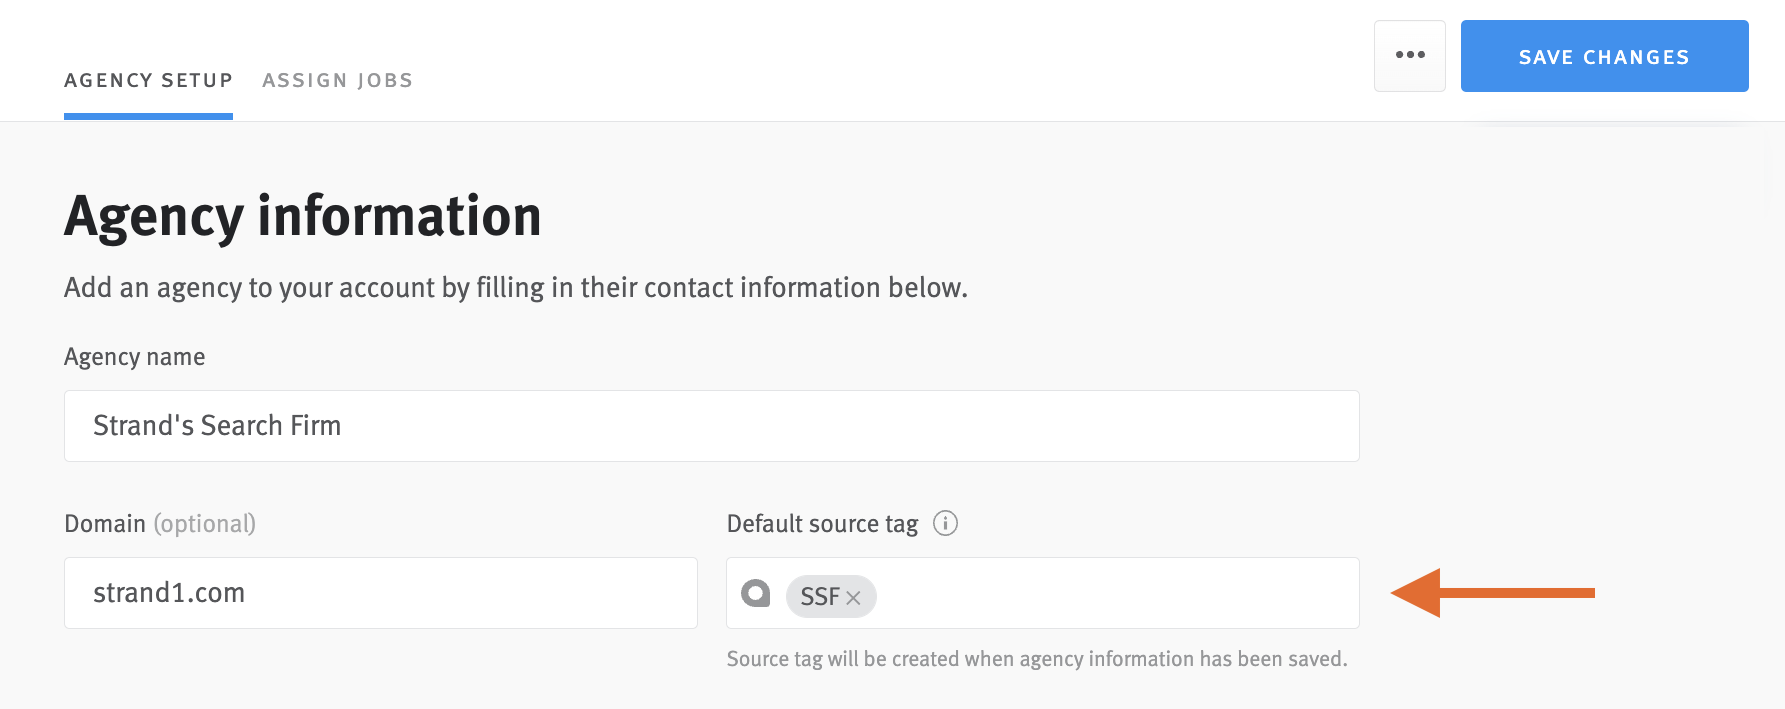 Agency information page with arrow pointing to default source tag field